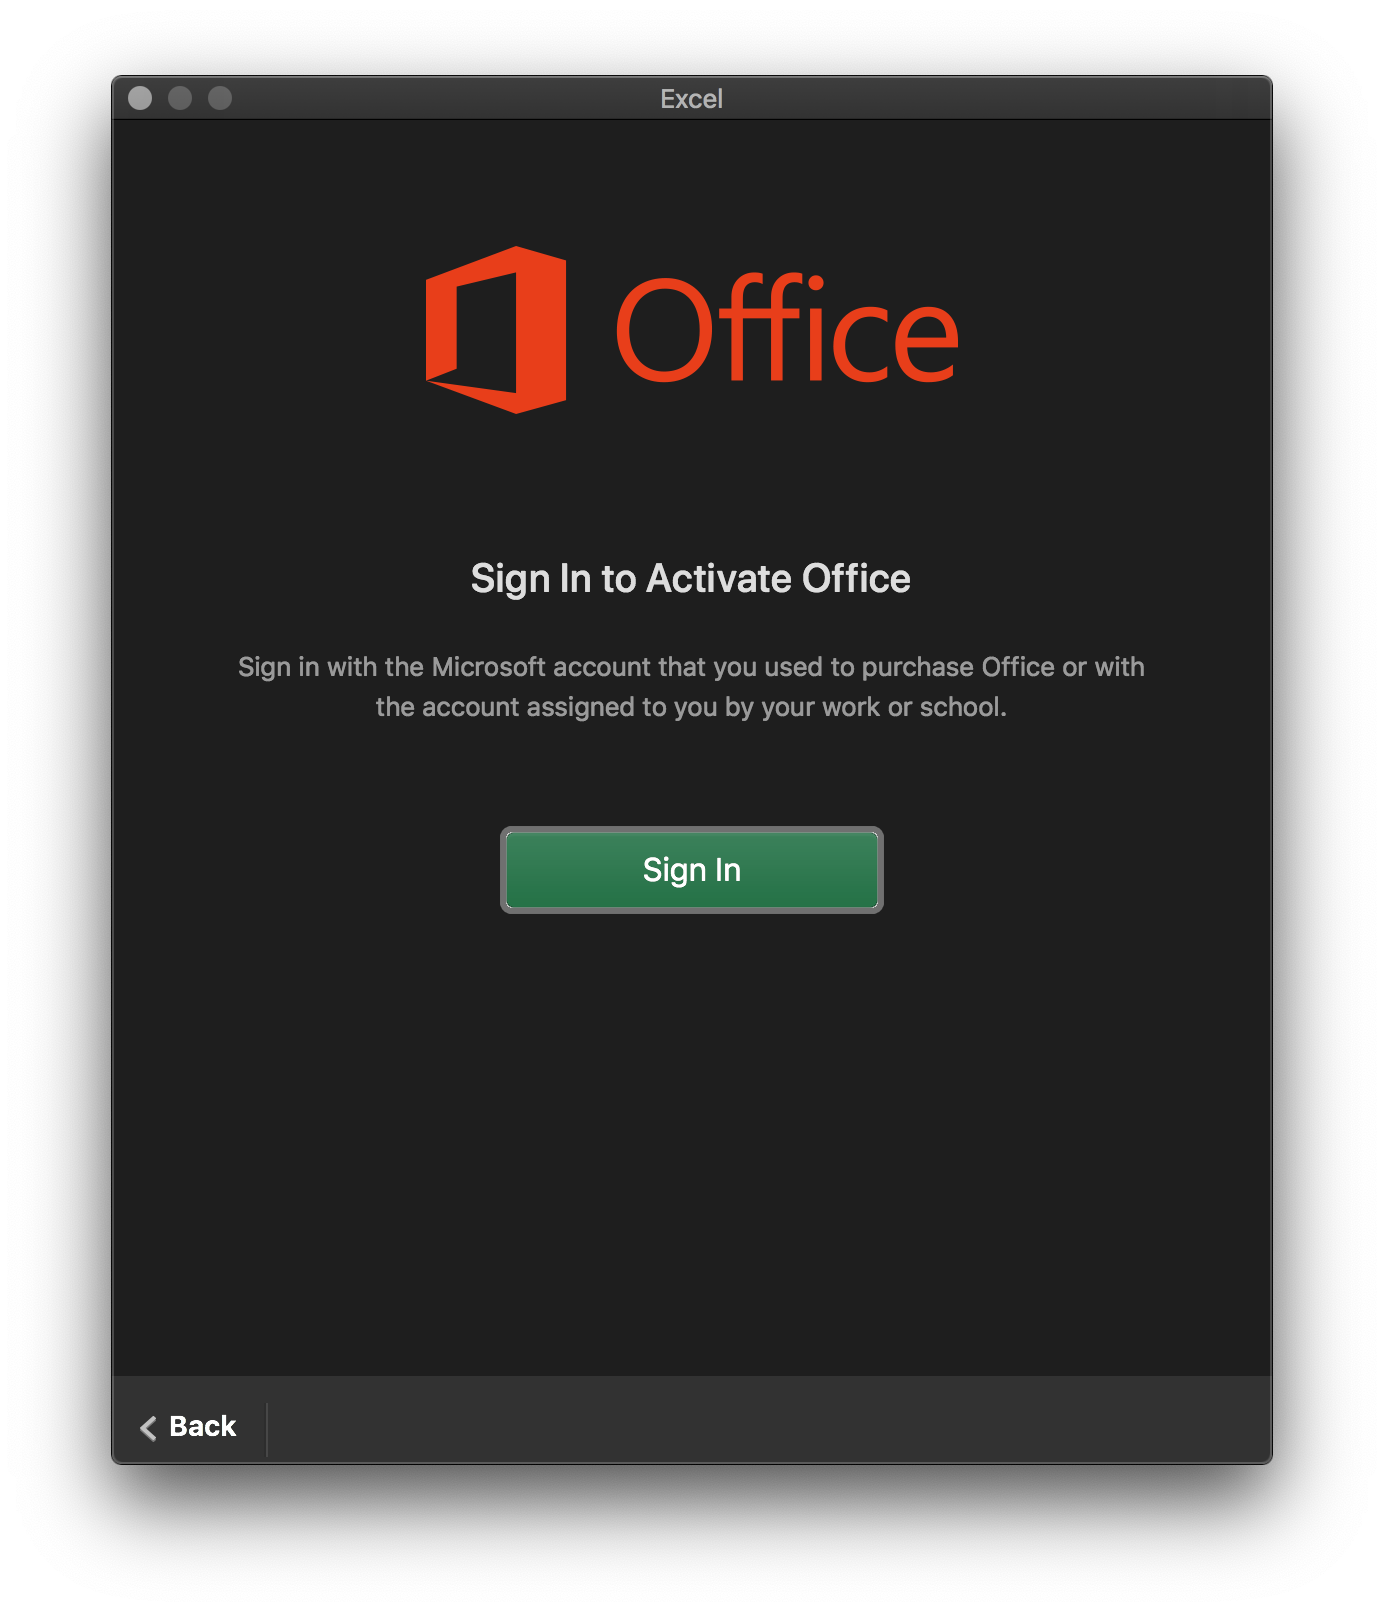 office home and business 2016 for mac kmsжїЂжґ»